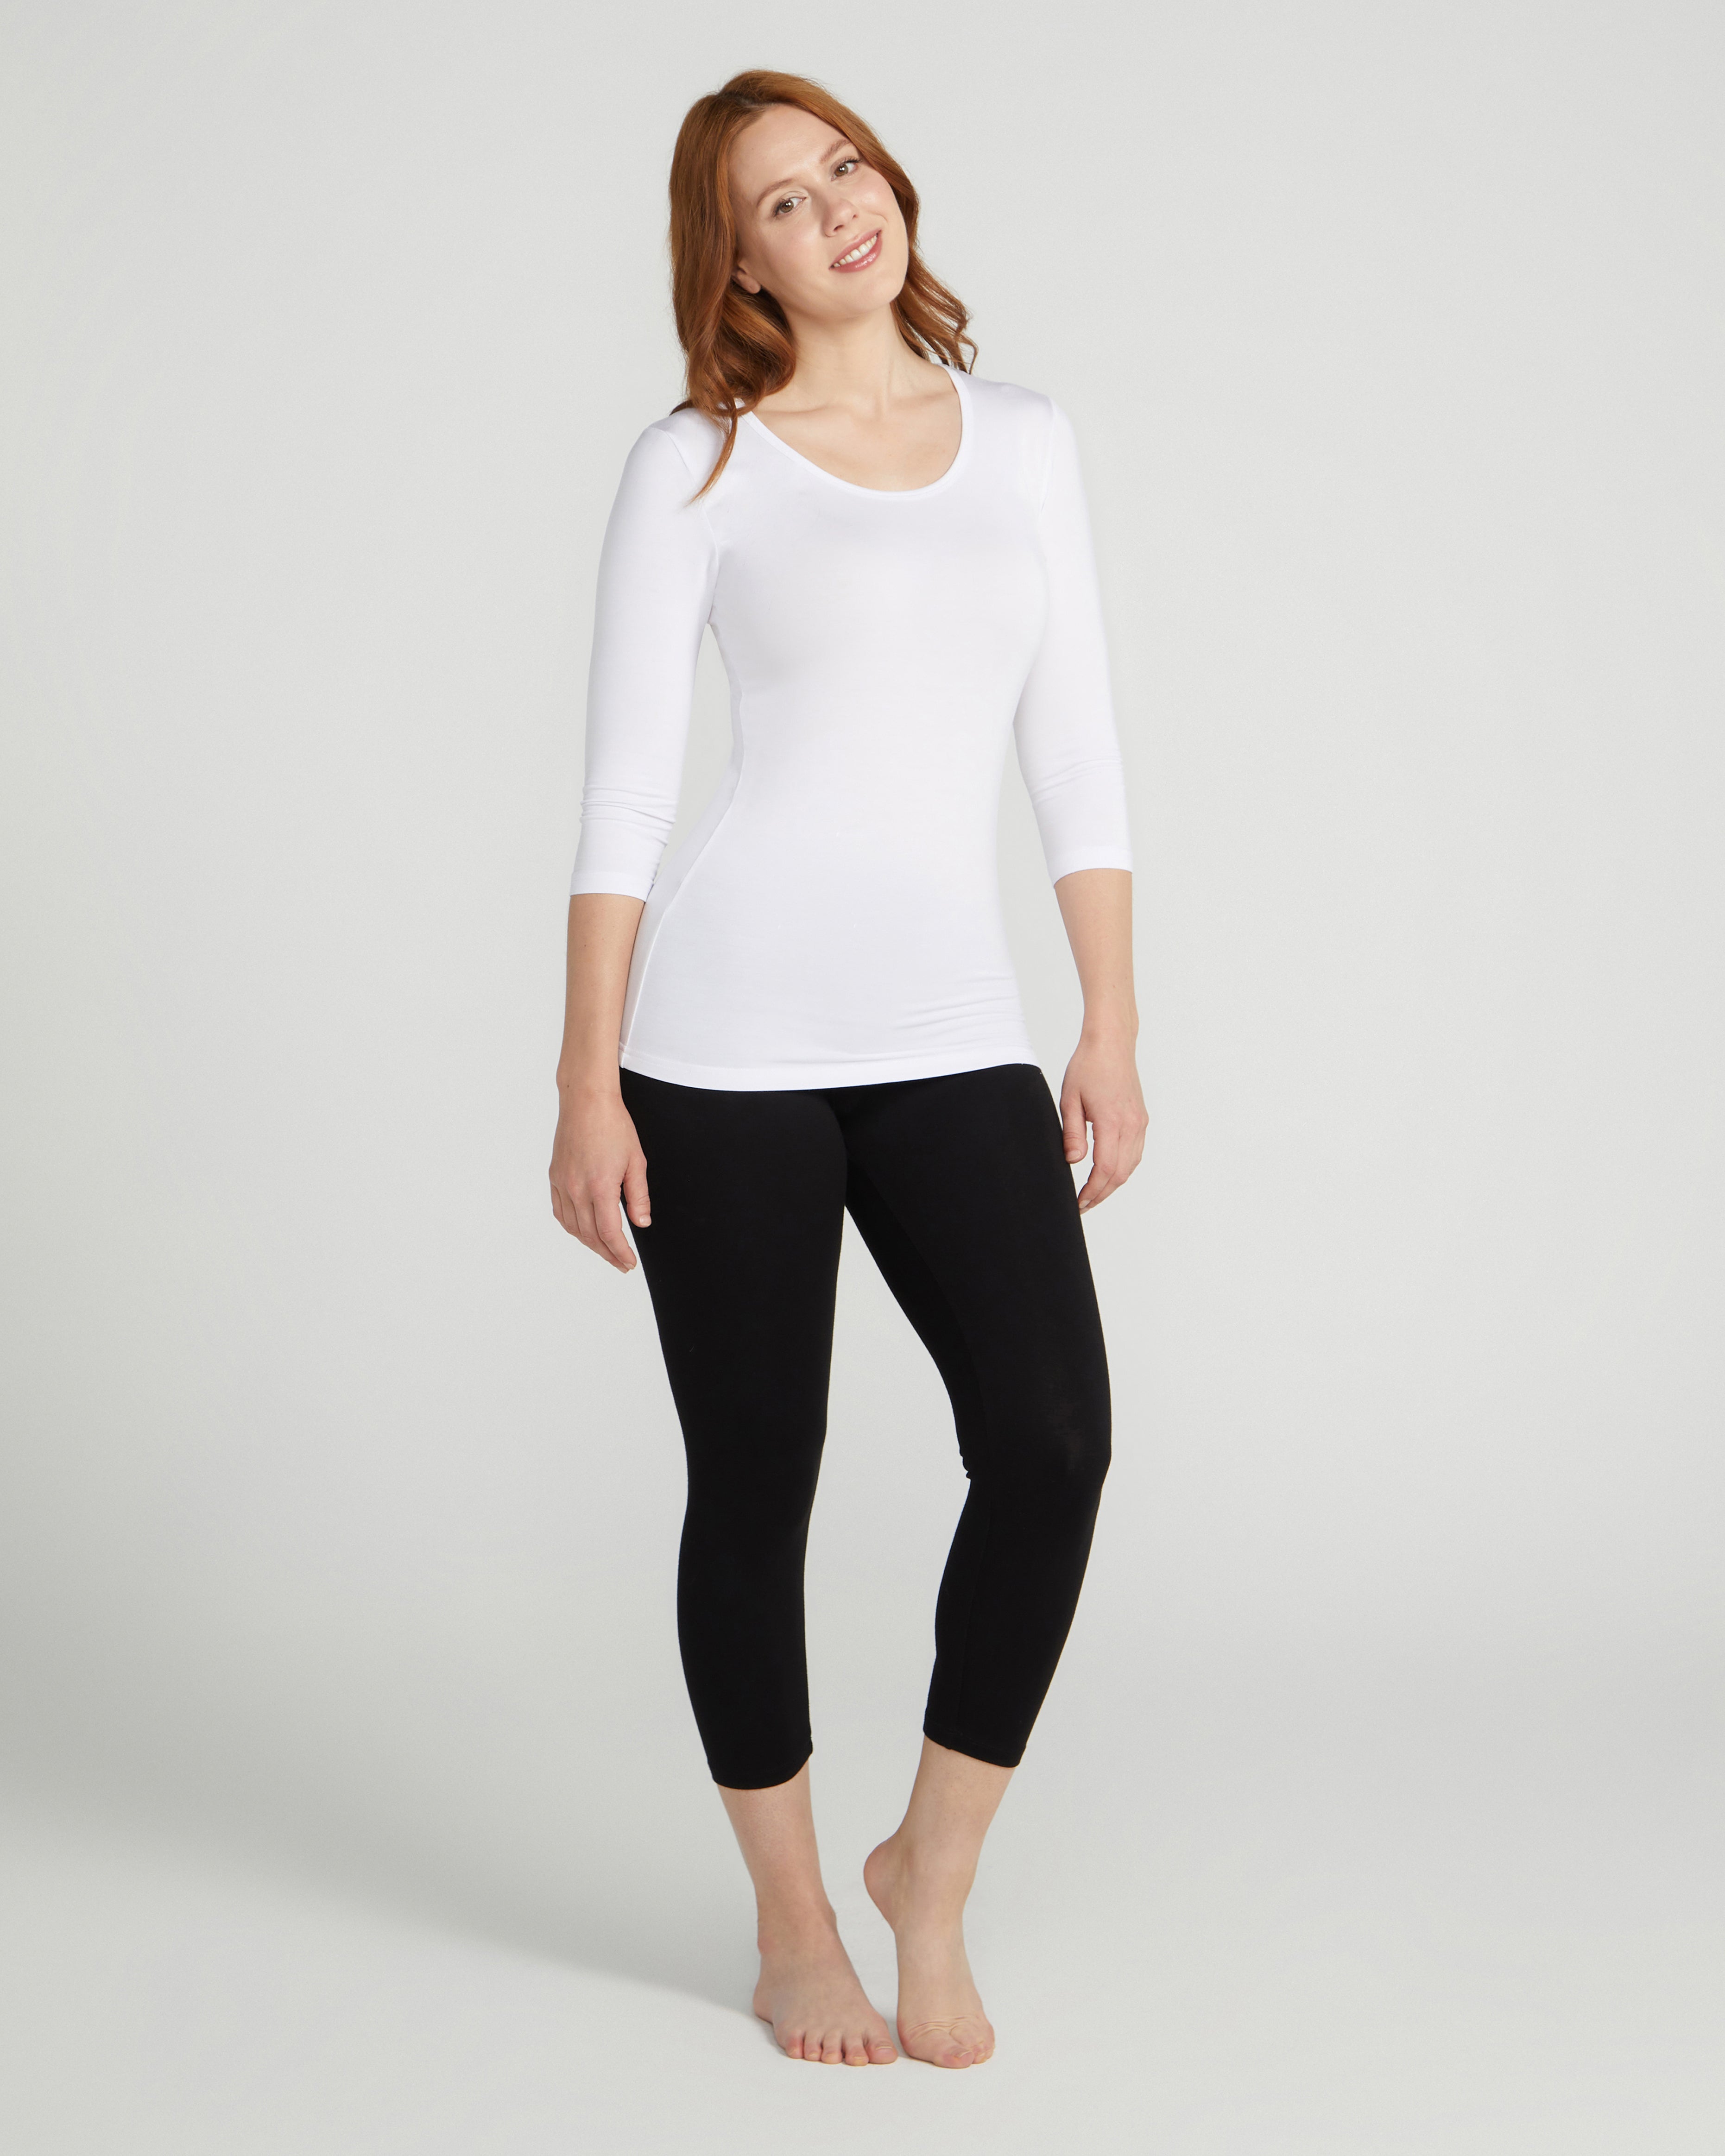 Boody Bamboo Basics | 3/4 Sleeve Top Black, White | Intimates - FOX AND  SCOUT